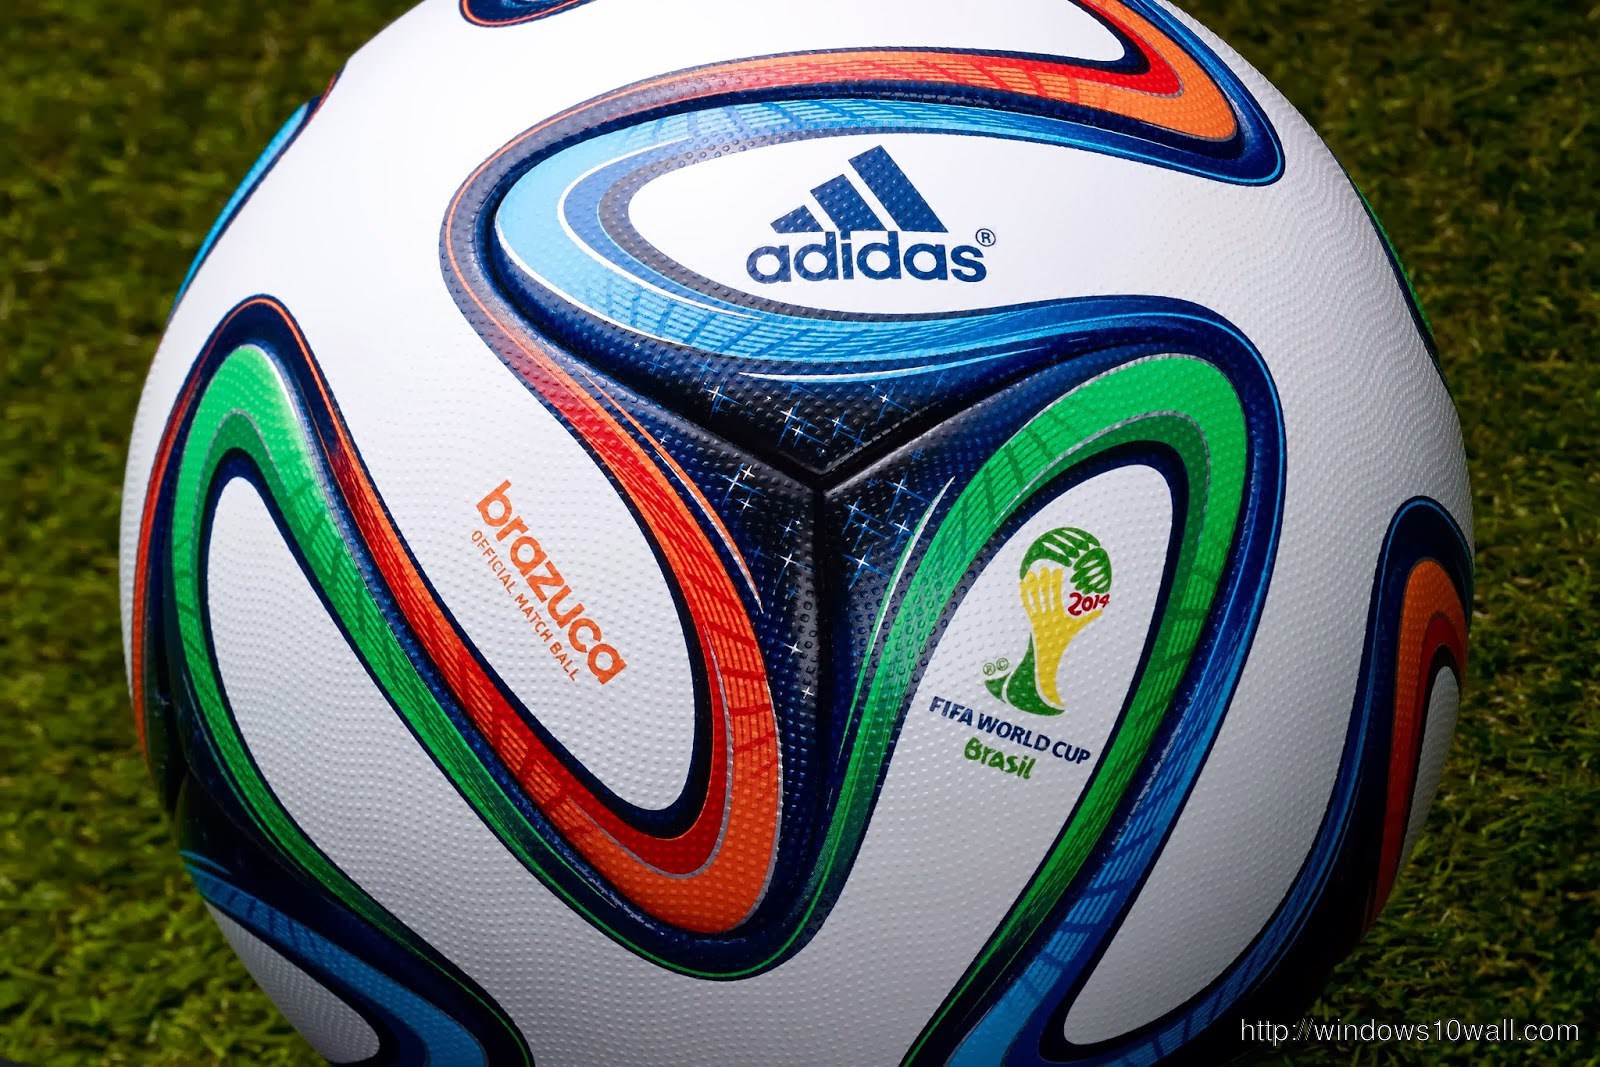 Adidas Brazuca Football For Fifa World Cup 2014 Hd Background Wallpaper